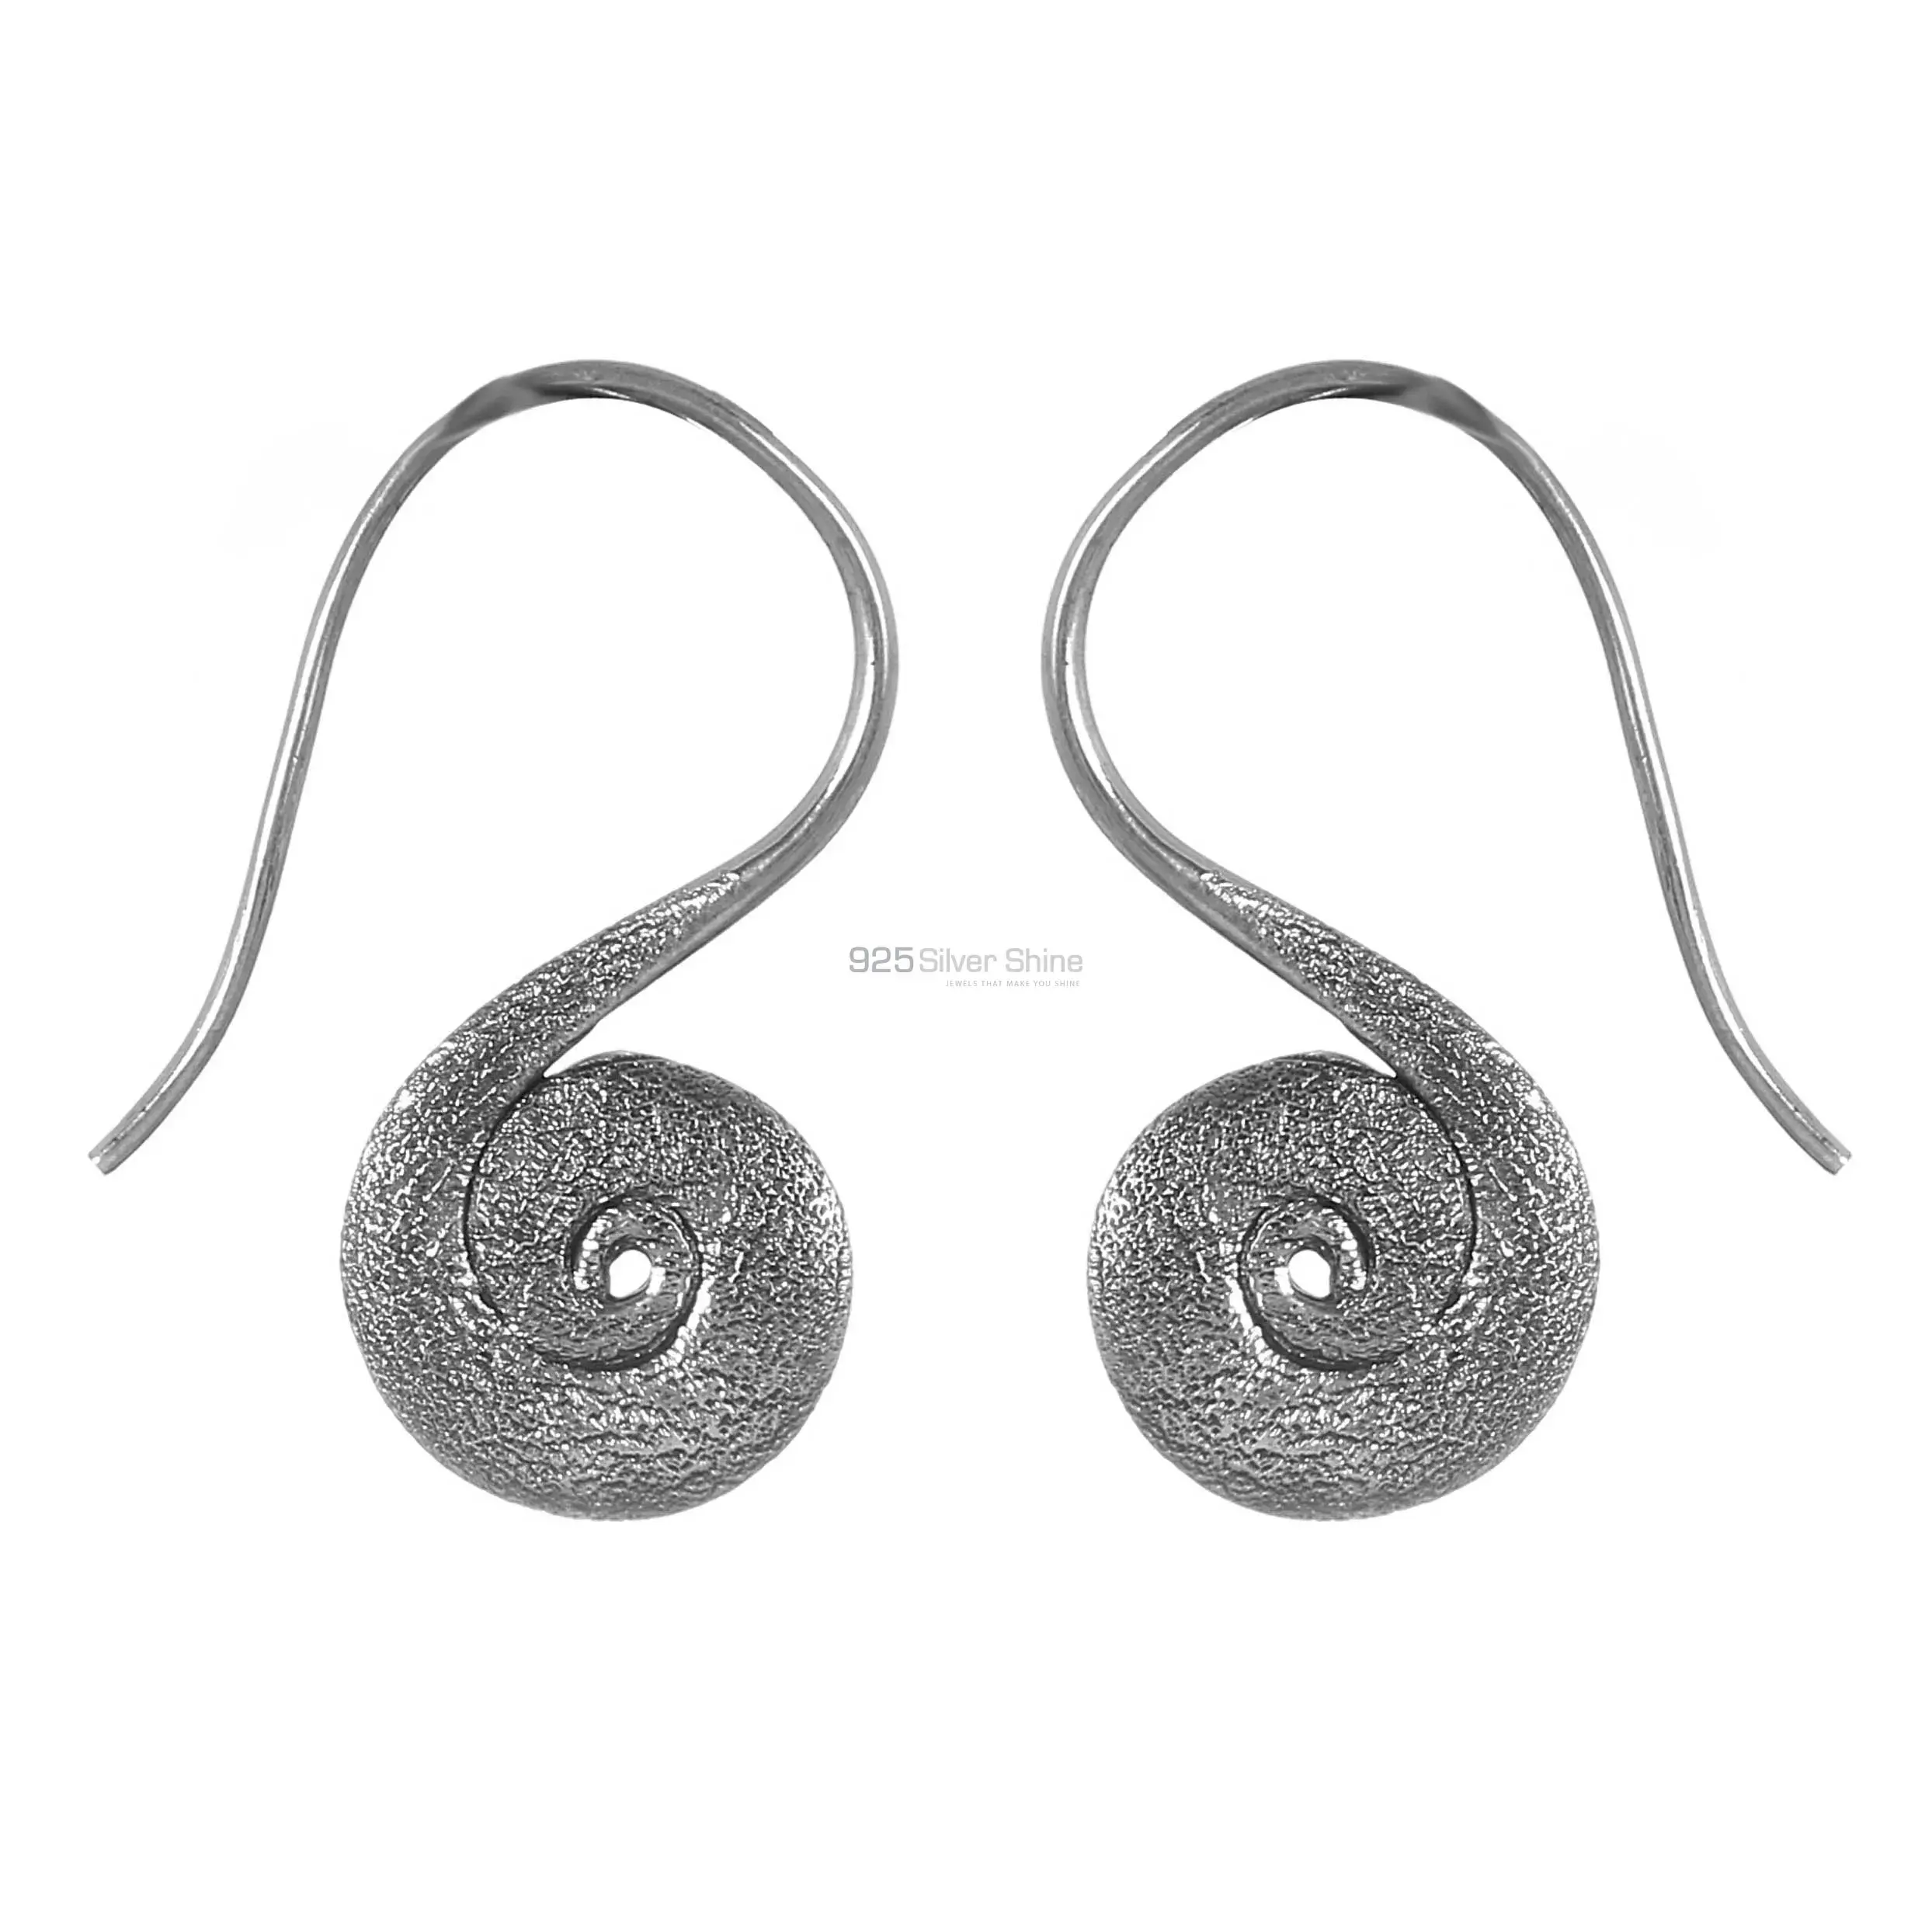 925 sterling silver Handmade vintage ethnic style hoops earrings Kundal  unisex tribal stylish unique Bali jewelry from India ear1223 | TRIBAL  ORNAMENTS